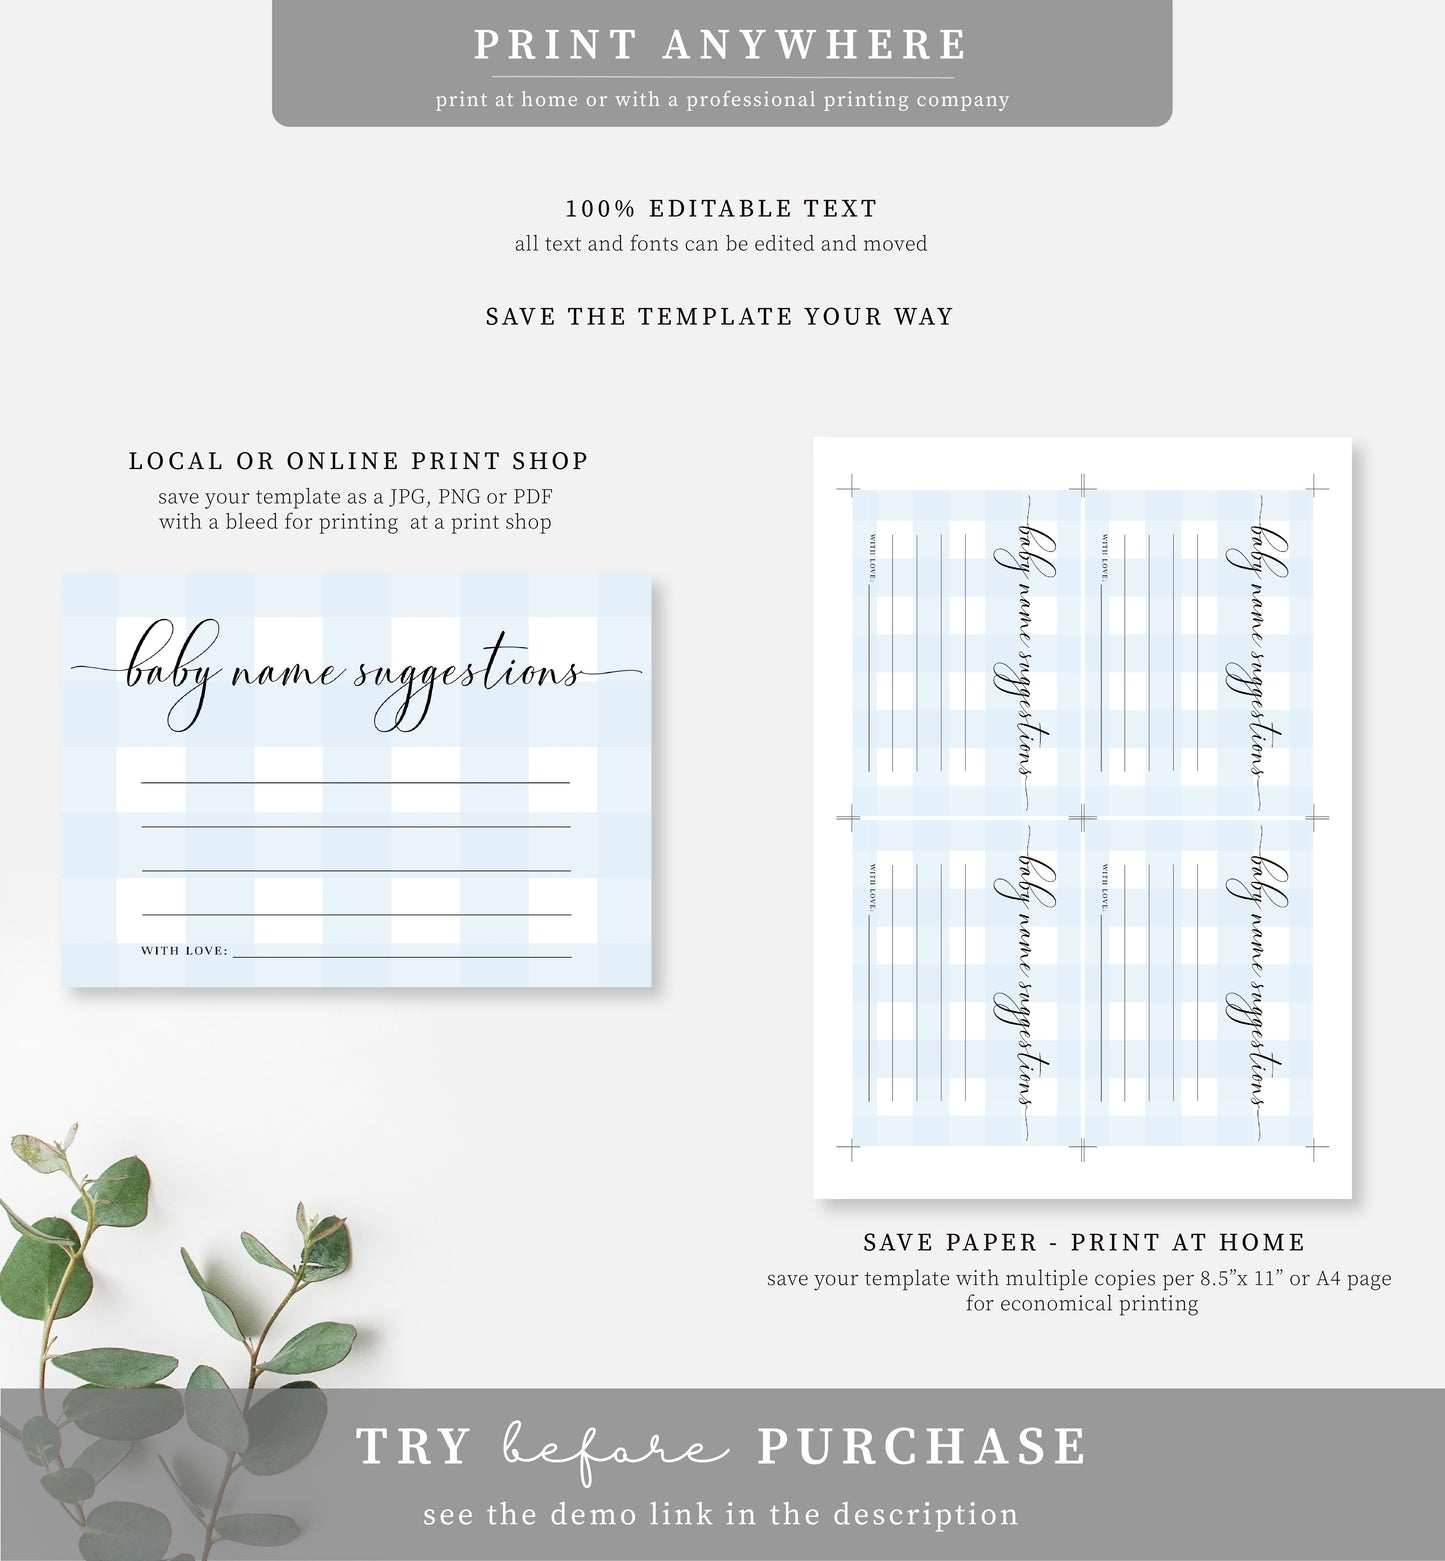 Gingham Blue | Printable Baby Name Suggestion Game Sign and Card Template